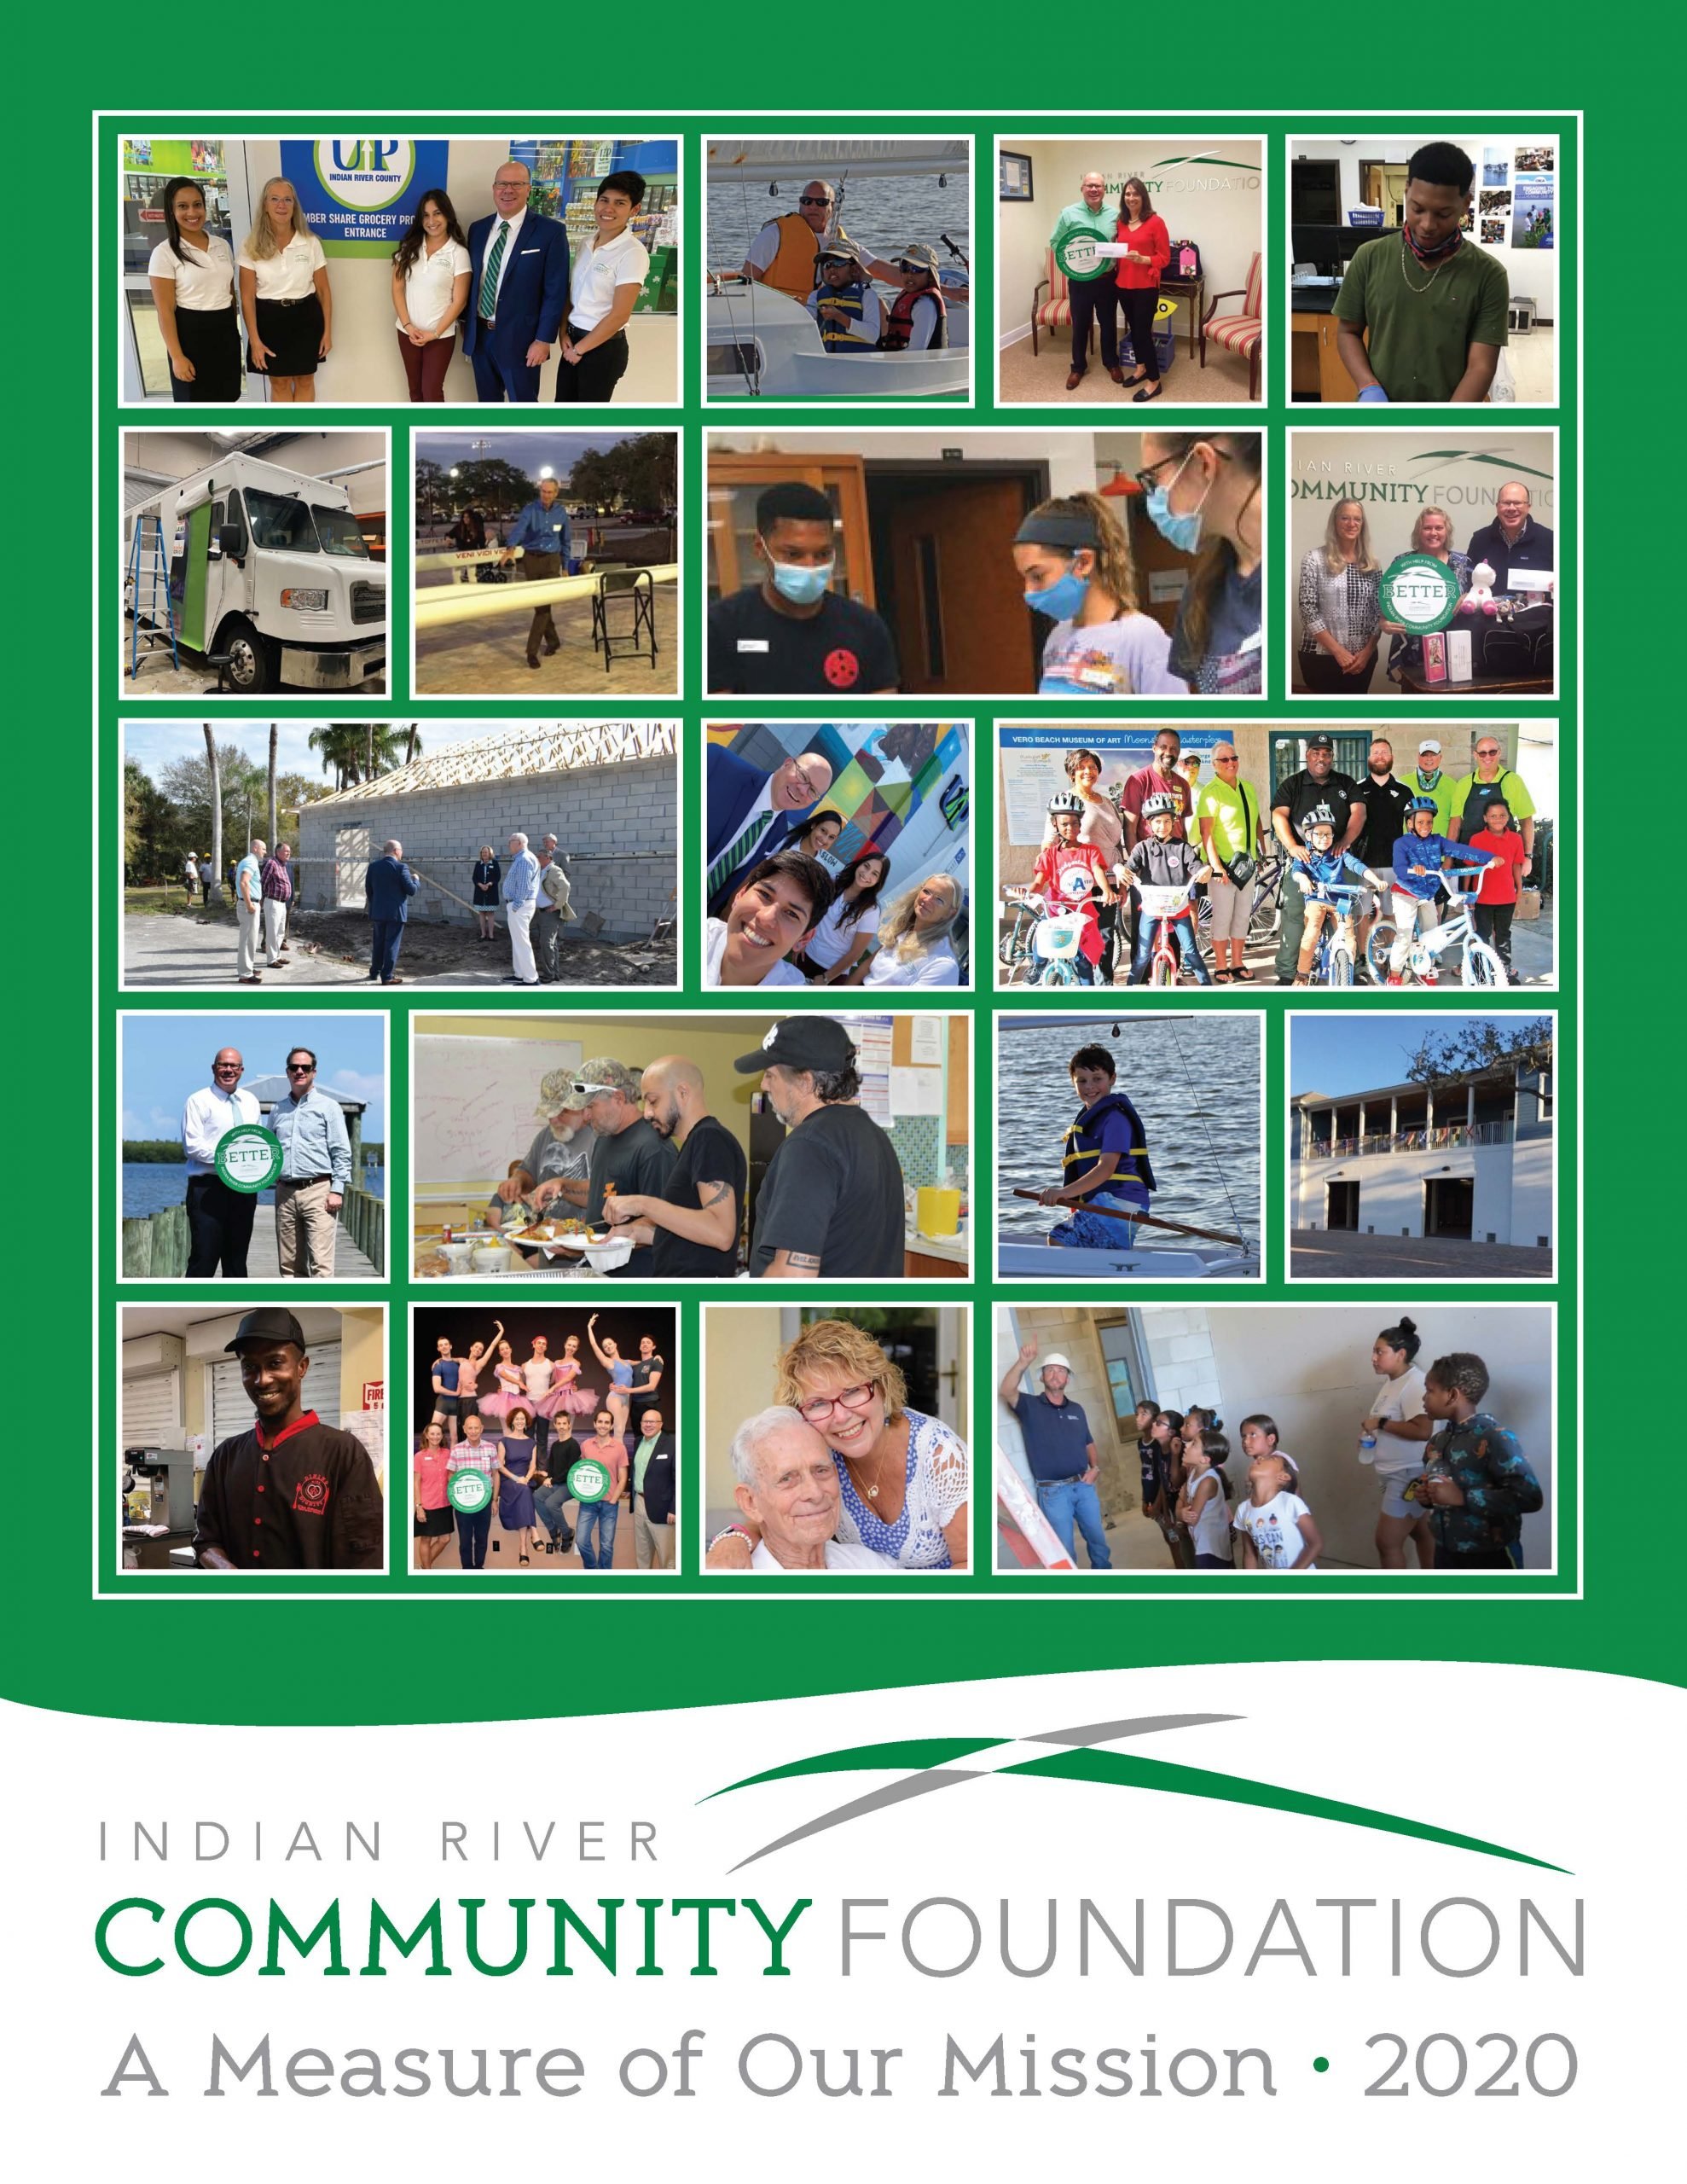 Community Foundation 2020 Annual Report Shows Success, Local Impact